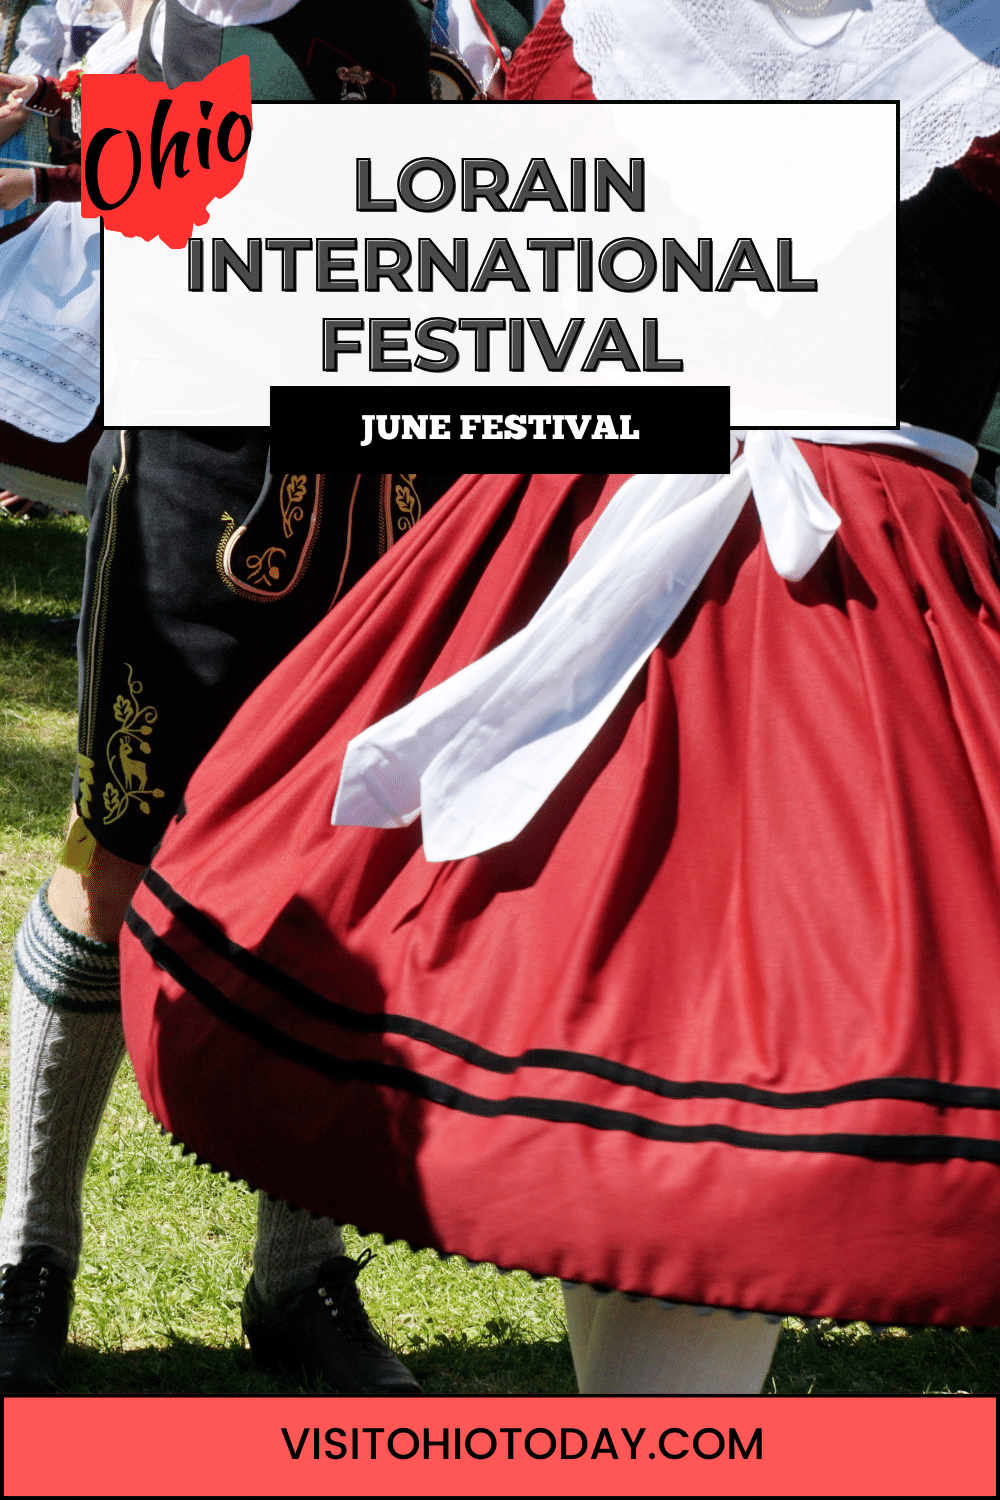 Lorain International Festival is a three-day event that takes place in Lorain at the end of June.